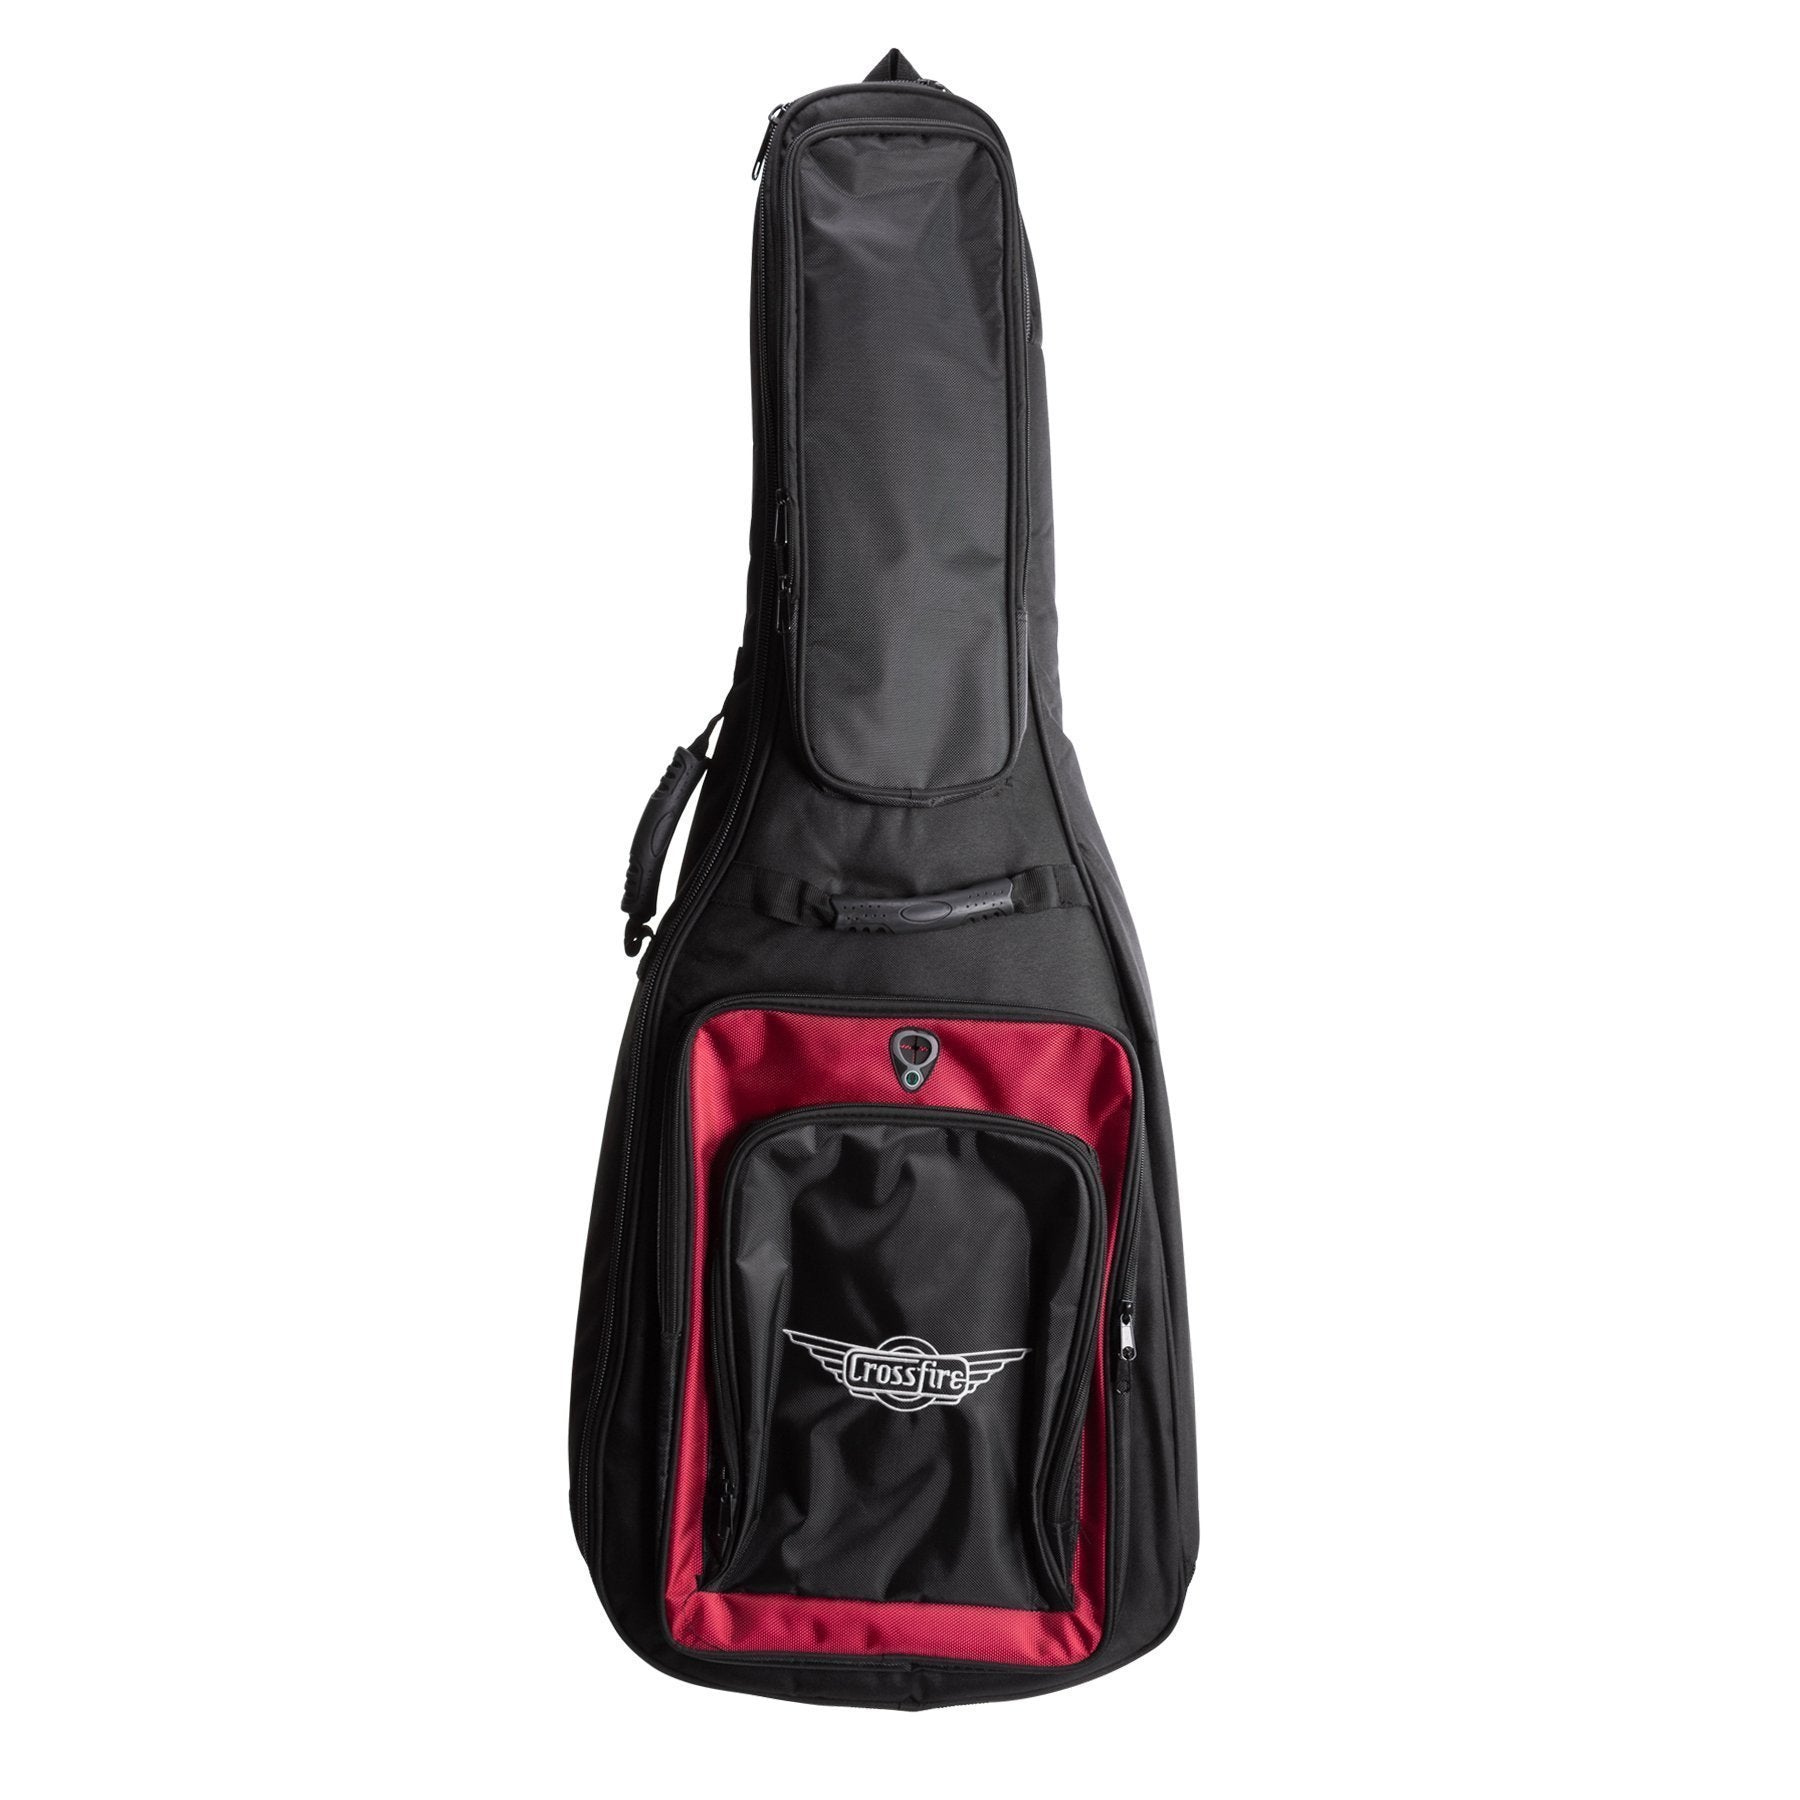 Crossfire Deluxe Padded Classical Guitar Gig Bag (Black)-XFGB-DC-BLK